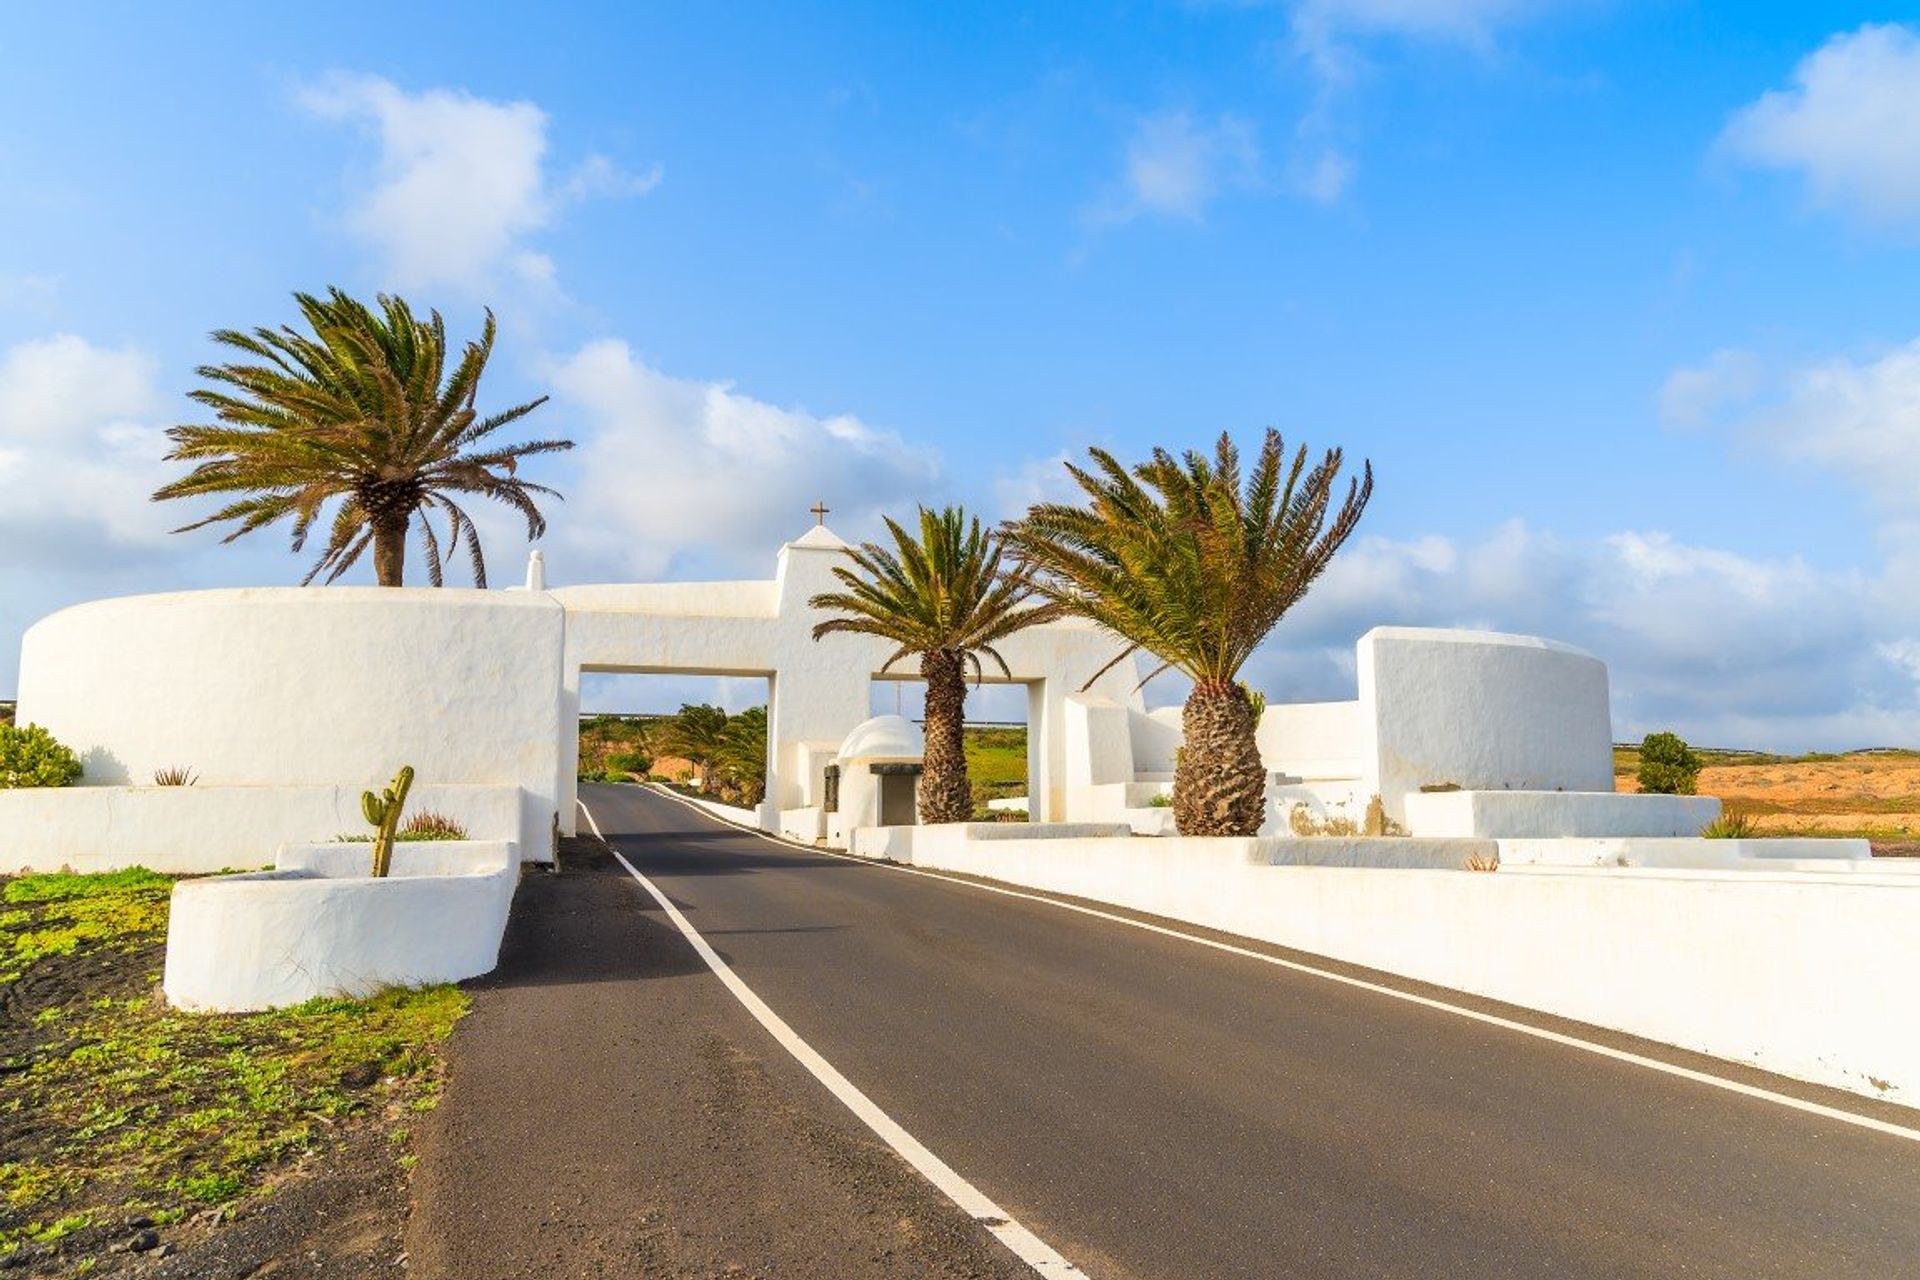 Typical whitewashed architecture at the gateway to Costa Teguise town